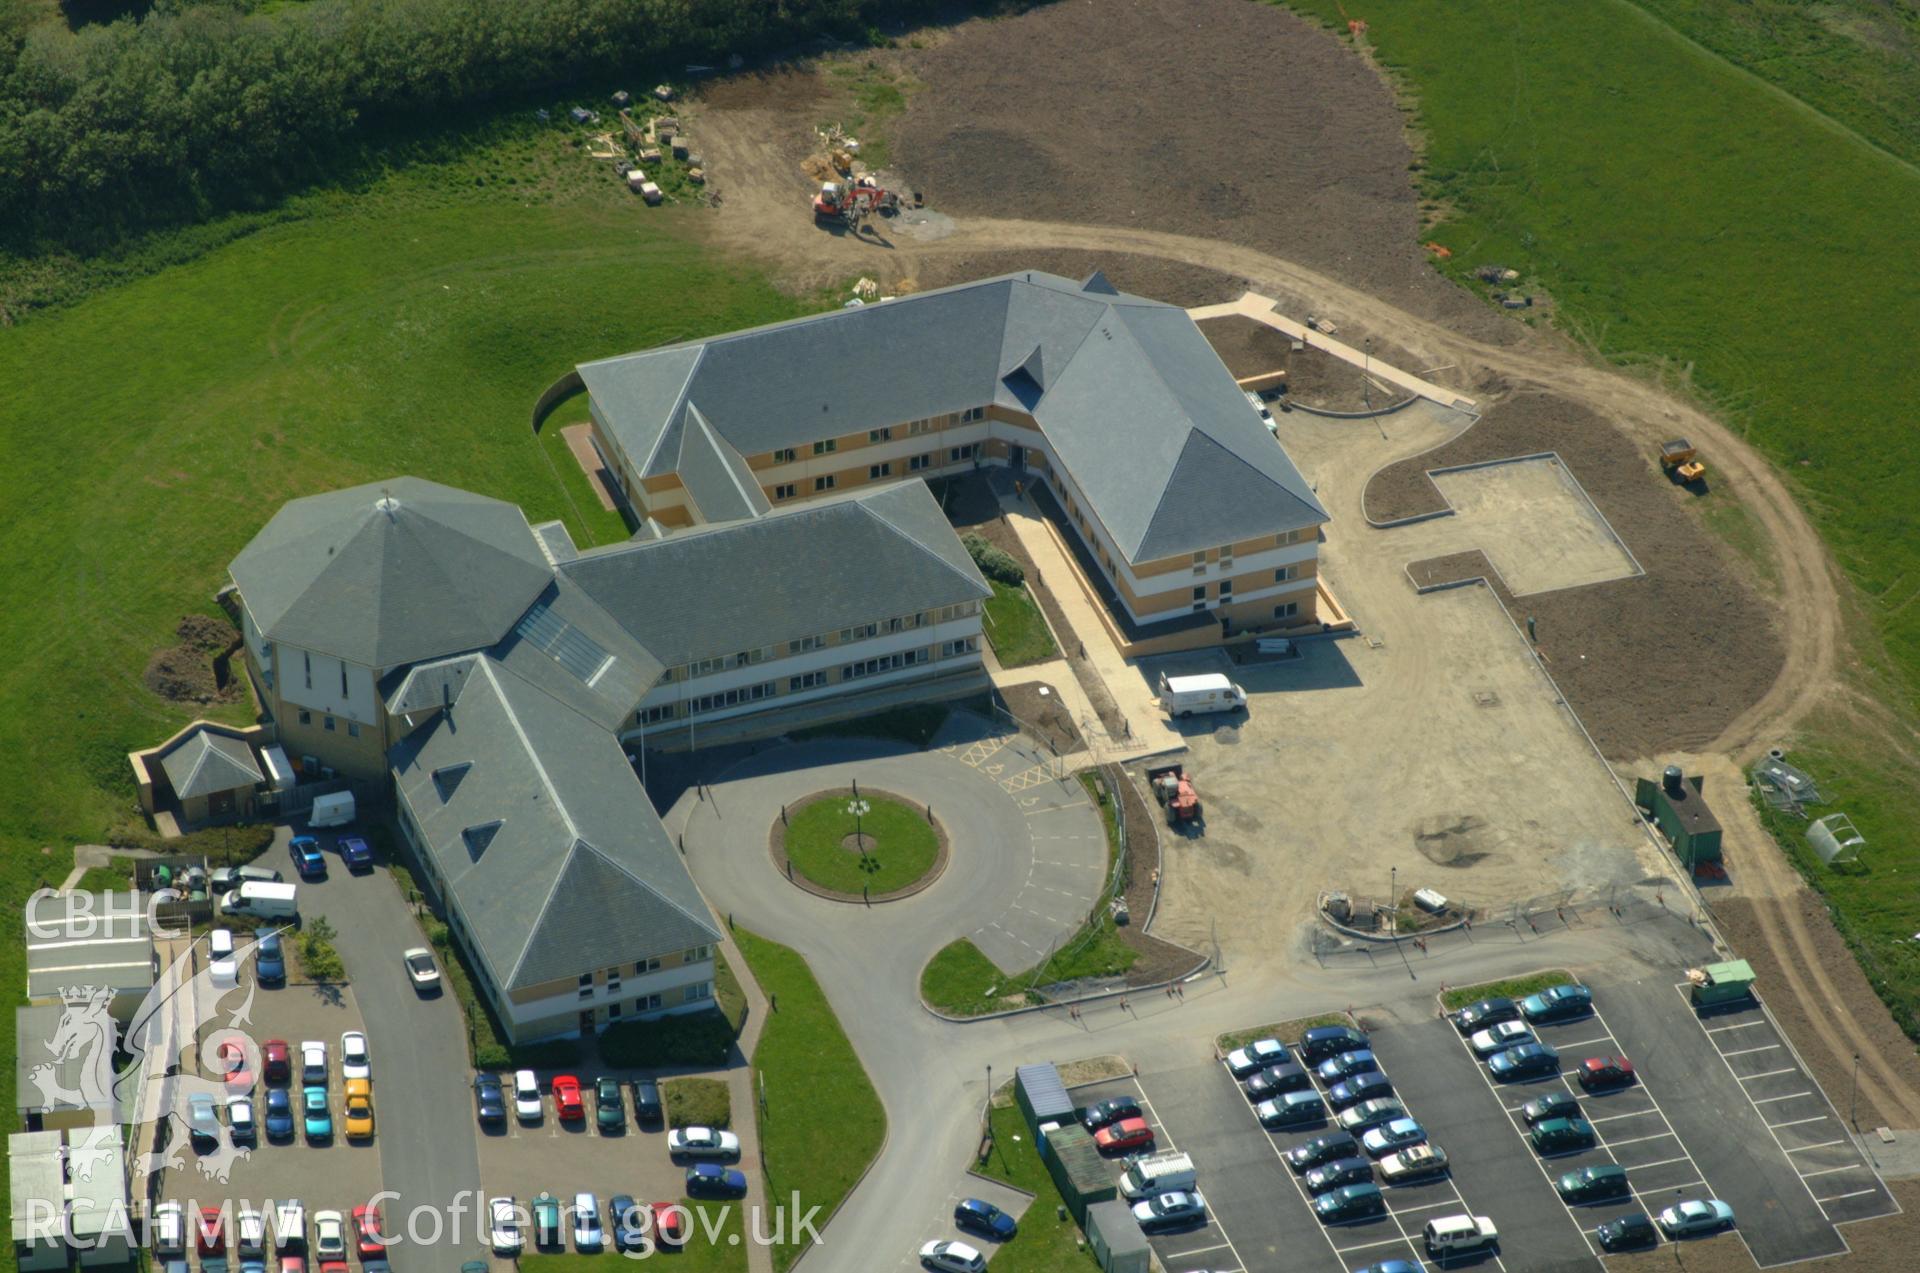 RCAHMW colour oblique aerial photograph of Penmorfa Council Buildings, Aberaeron. Taken on 24 May 2004 by Toby Driver